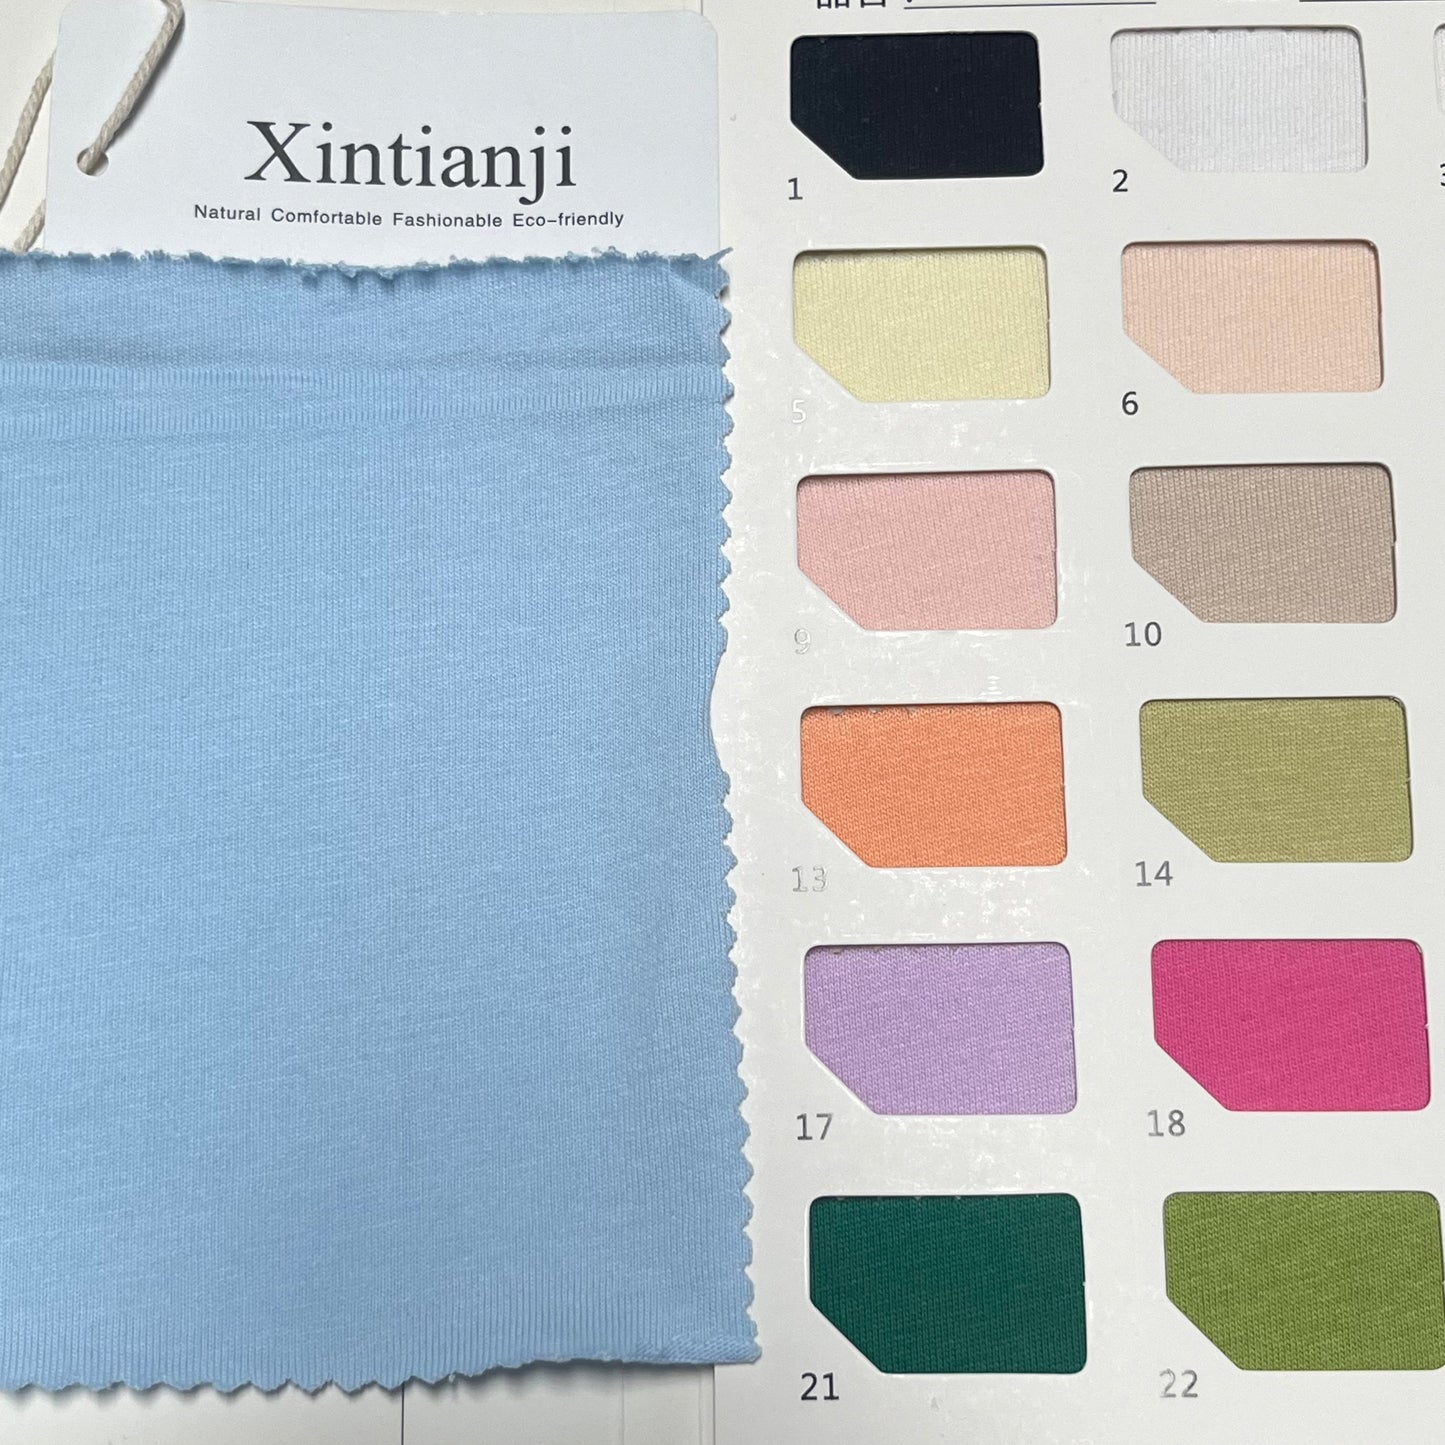 NTG Fad Xintianji Cotton Jersey Fabric For Clothing